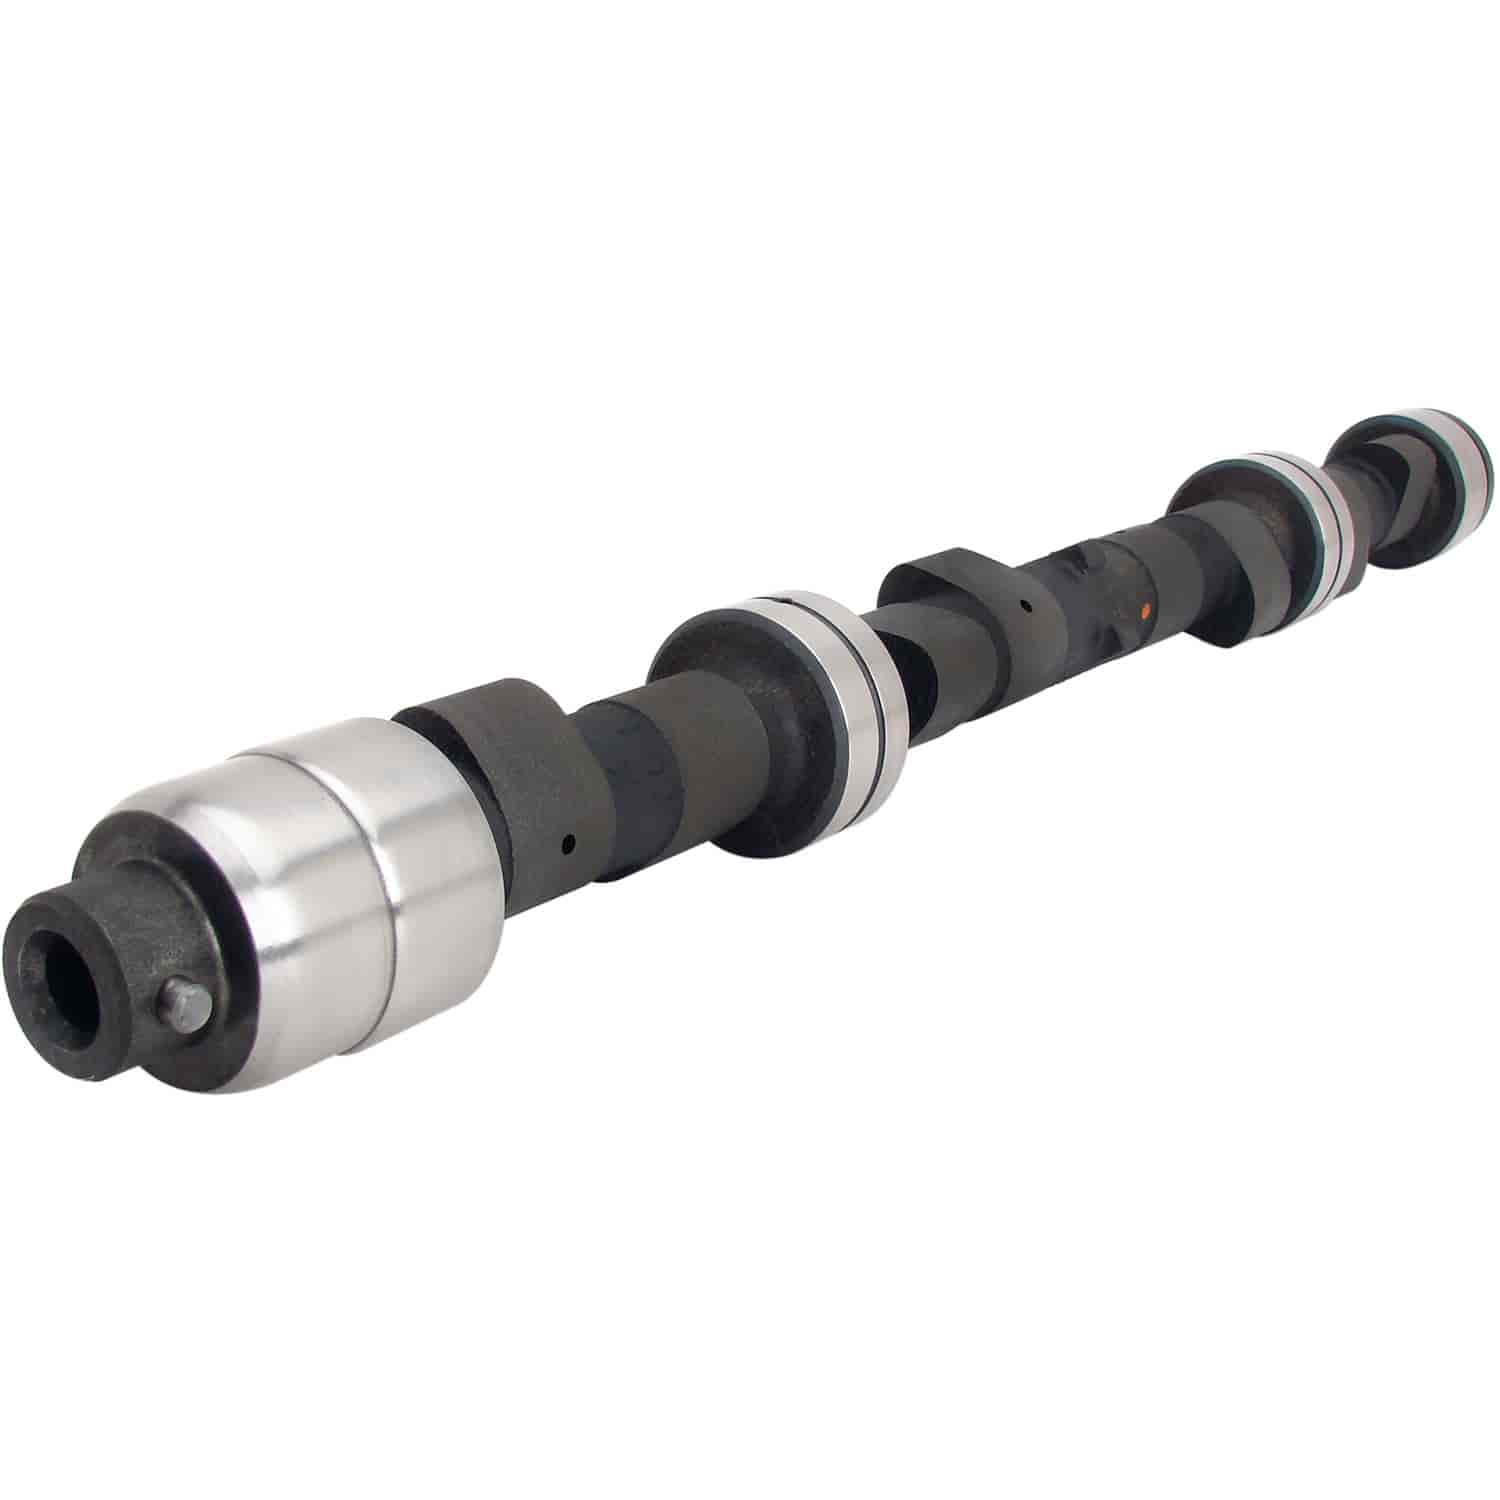 Oval Track Solid Flat Tappet Camshaft Ford 2000cc/2300cc Lift: .548" /.548"